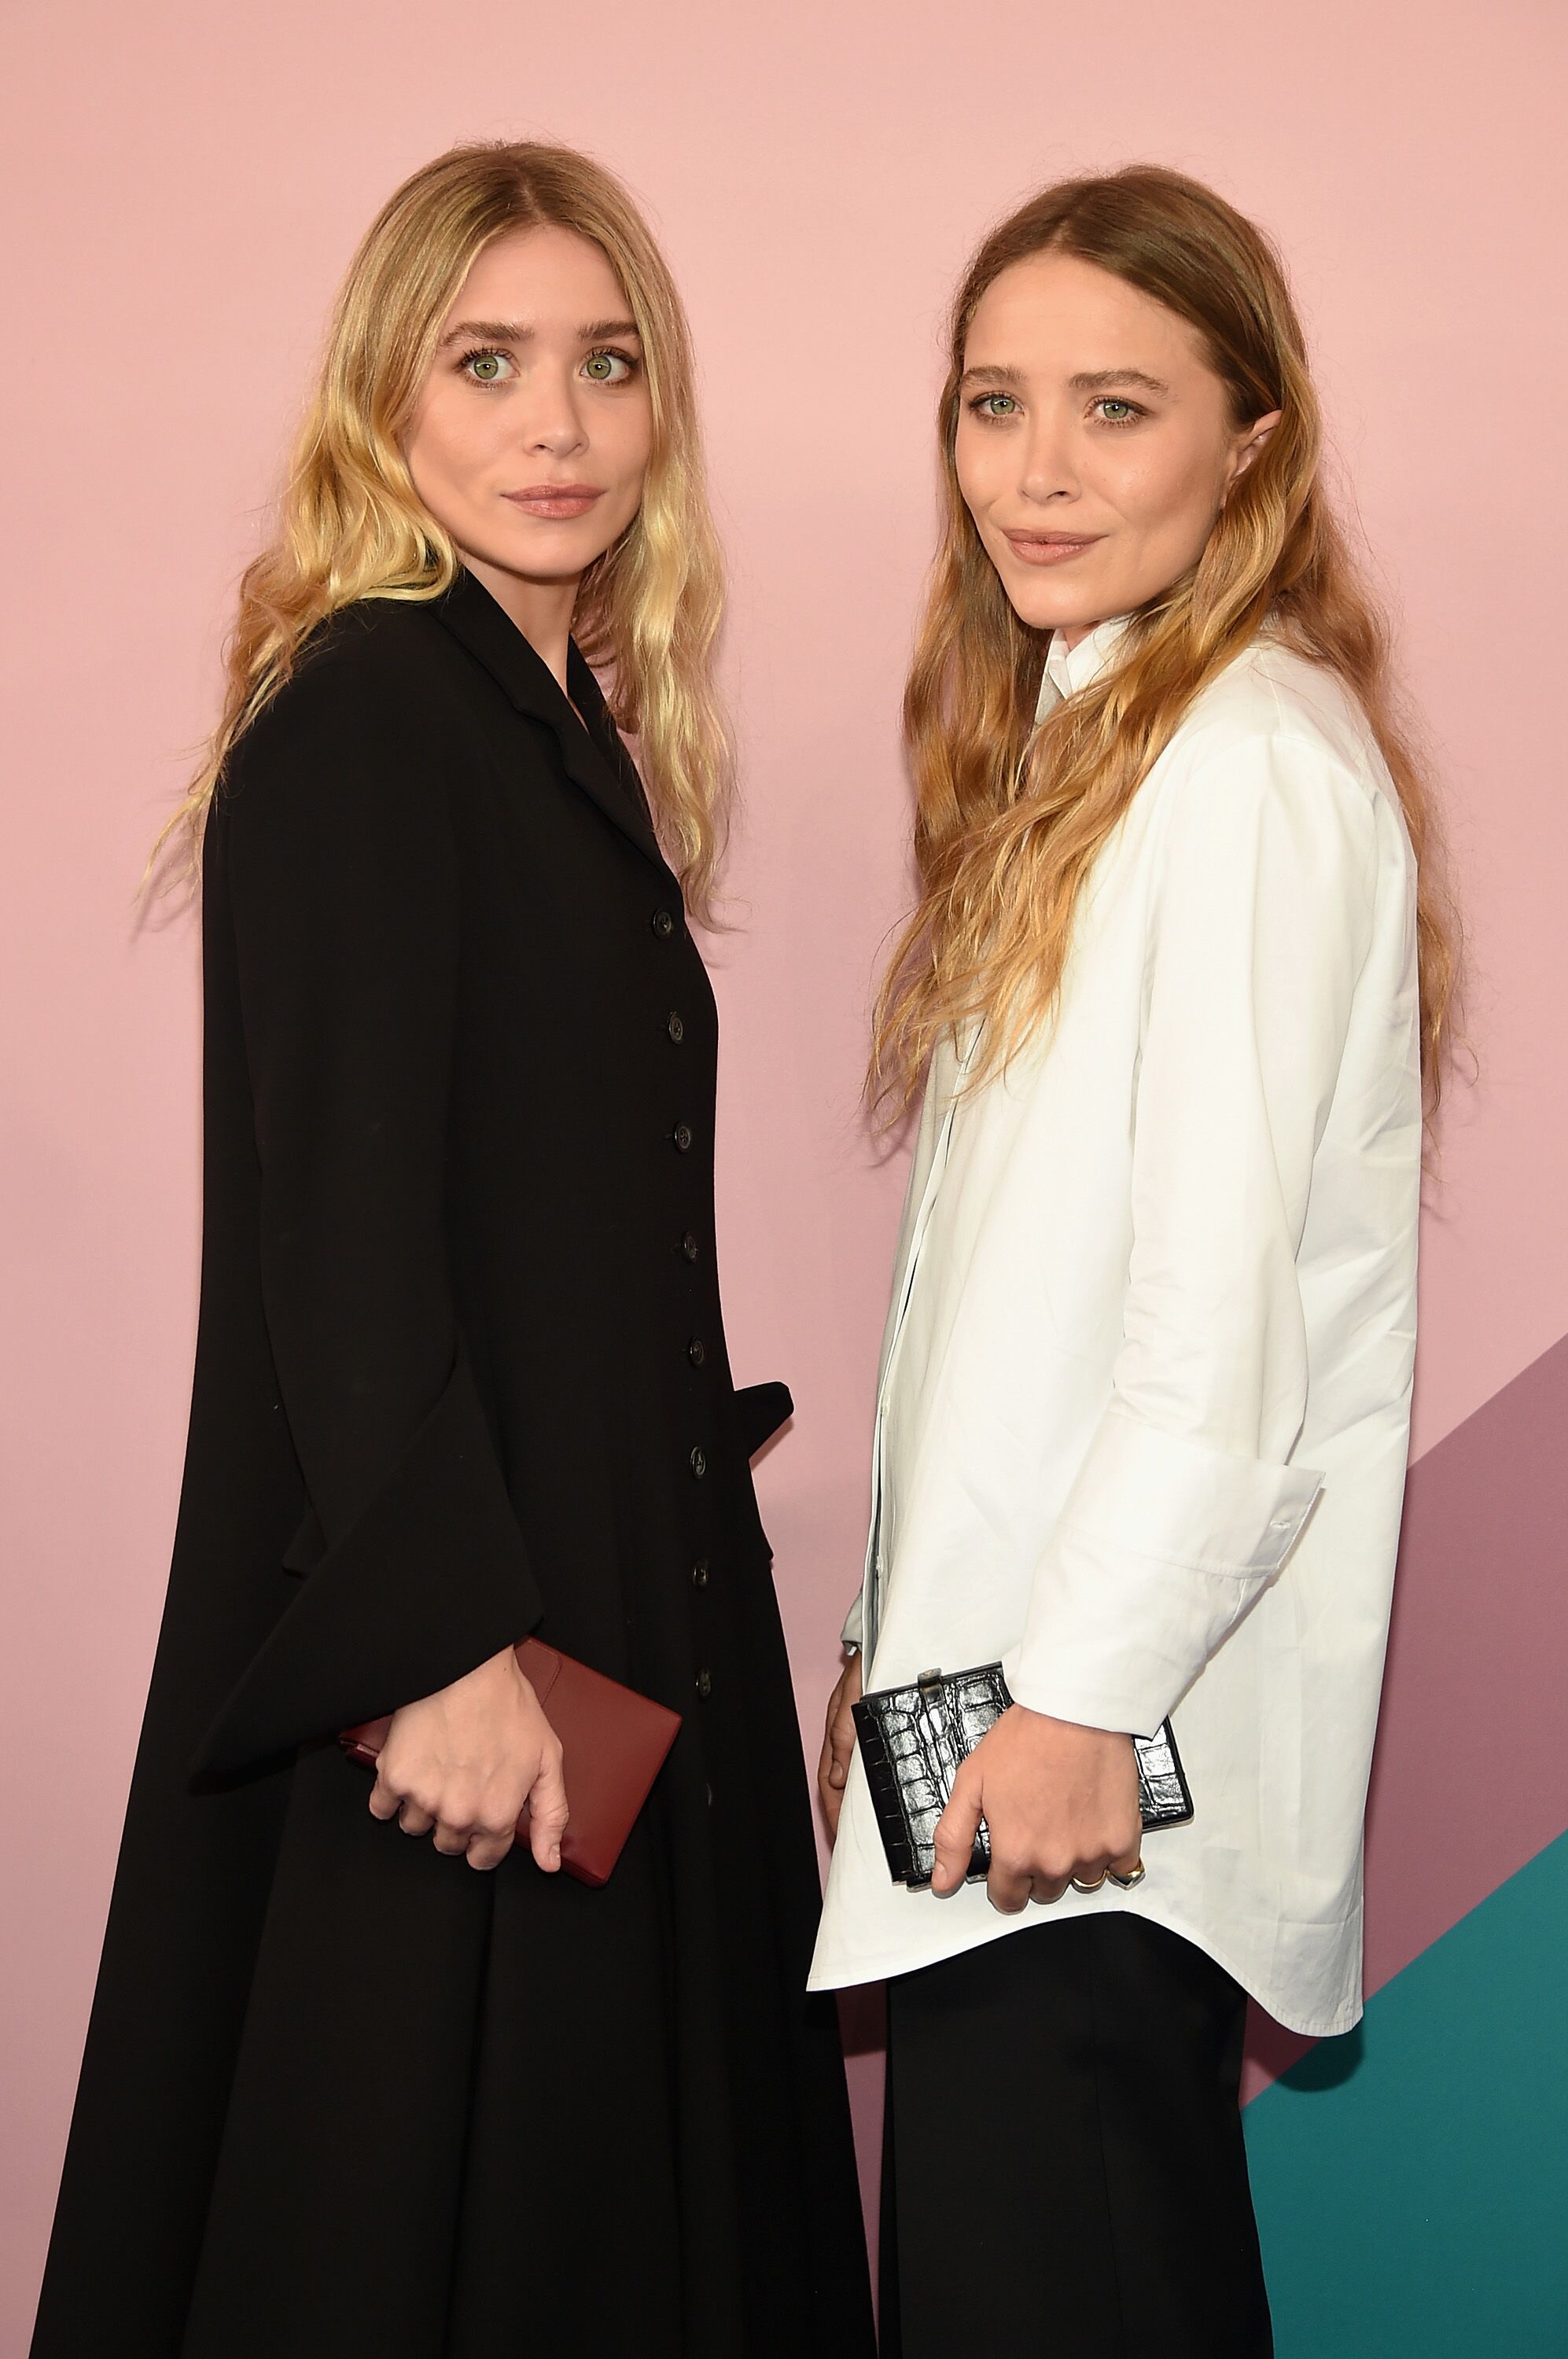 Ashley Olsen and Mary-Kate Olsen at the 2017 CFDA Fashion Awards in New York. | Photo: Getty Images